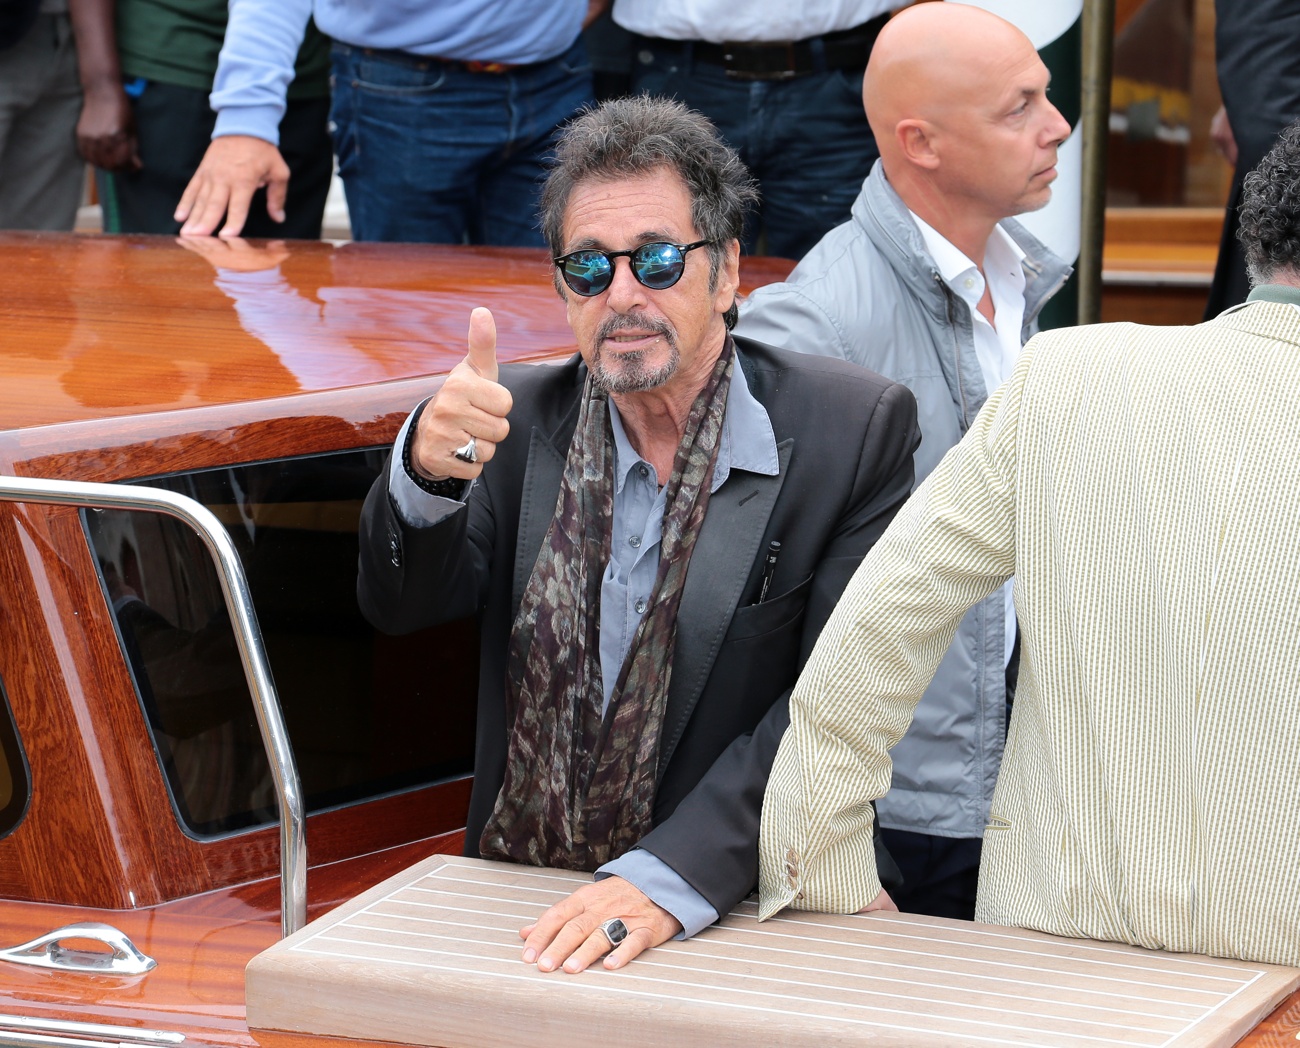 Al Pacino becomes a dad again: expecting his fourth child after 22 years